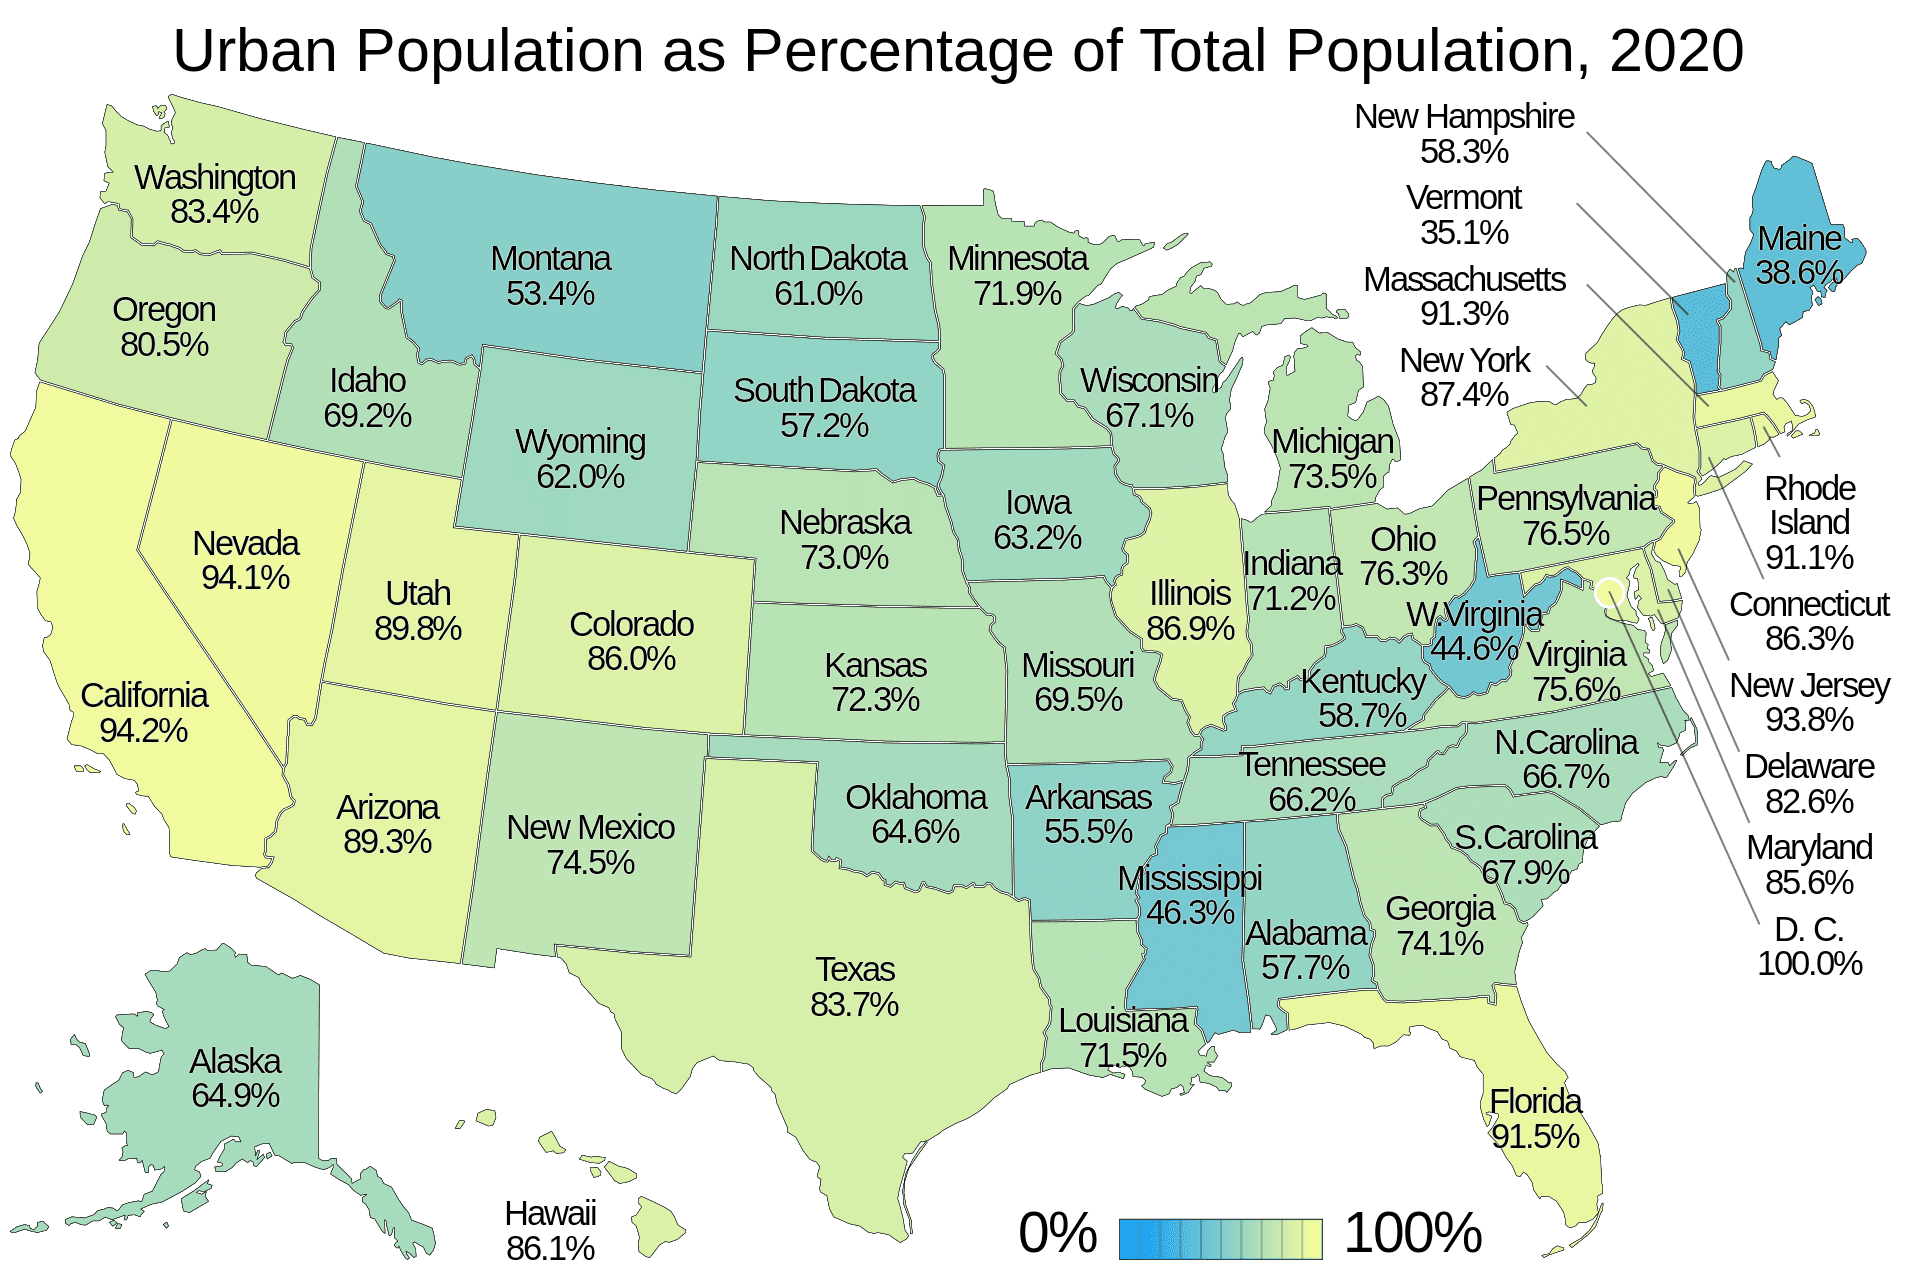 Map of the United States showing urban population as percentage of total population for each state